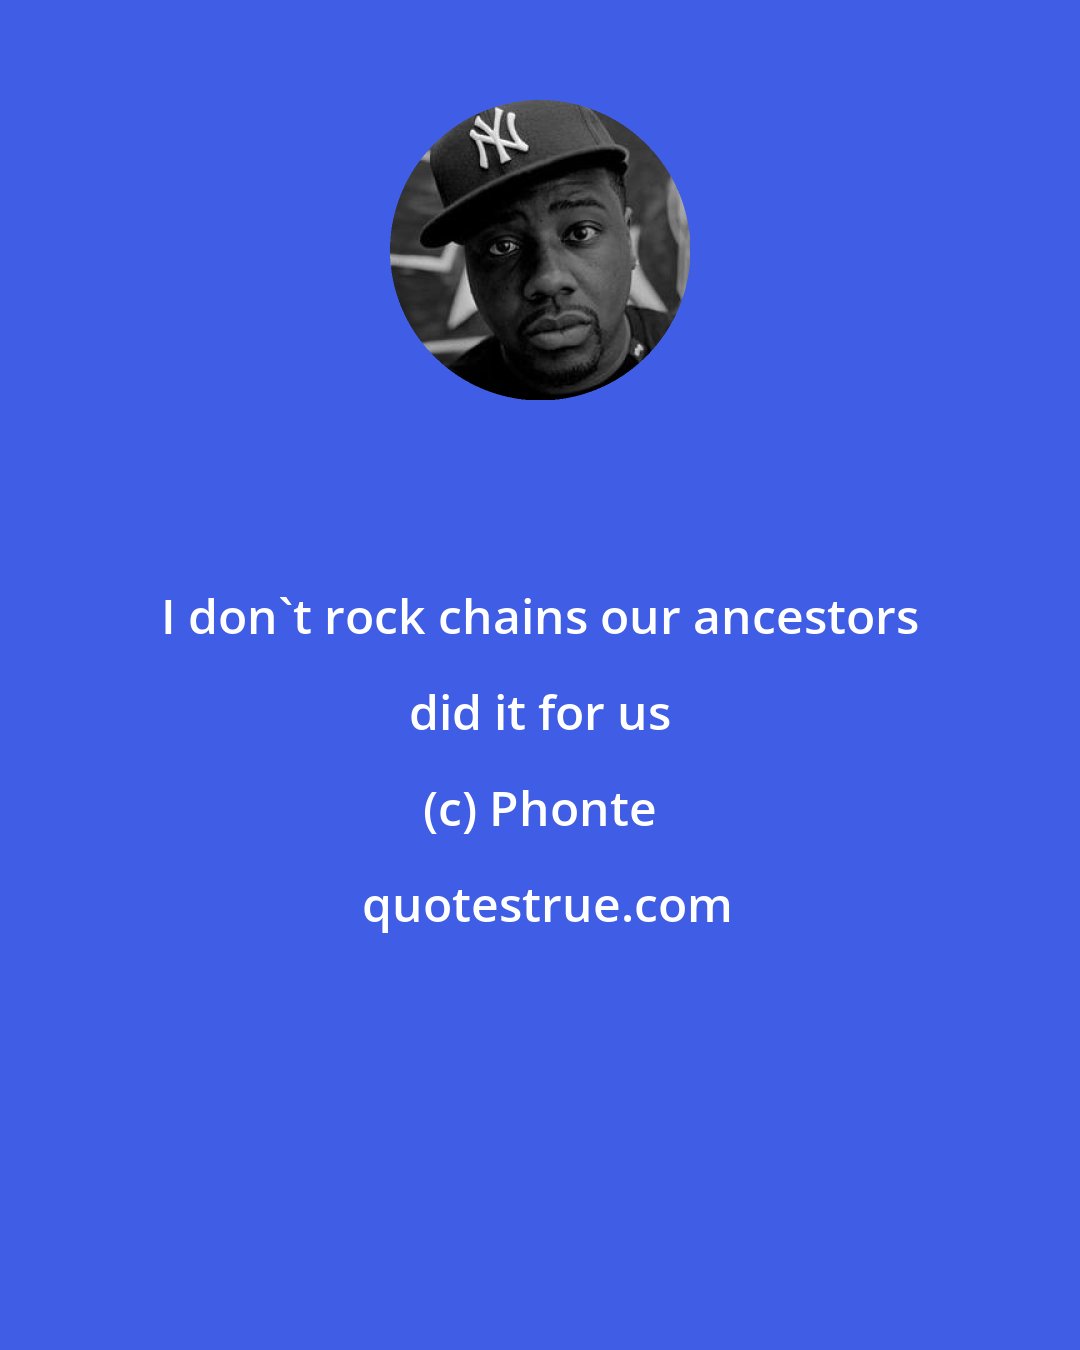 Phonte: I don't rock chains our ancestors did it for us